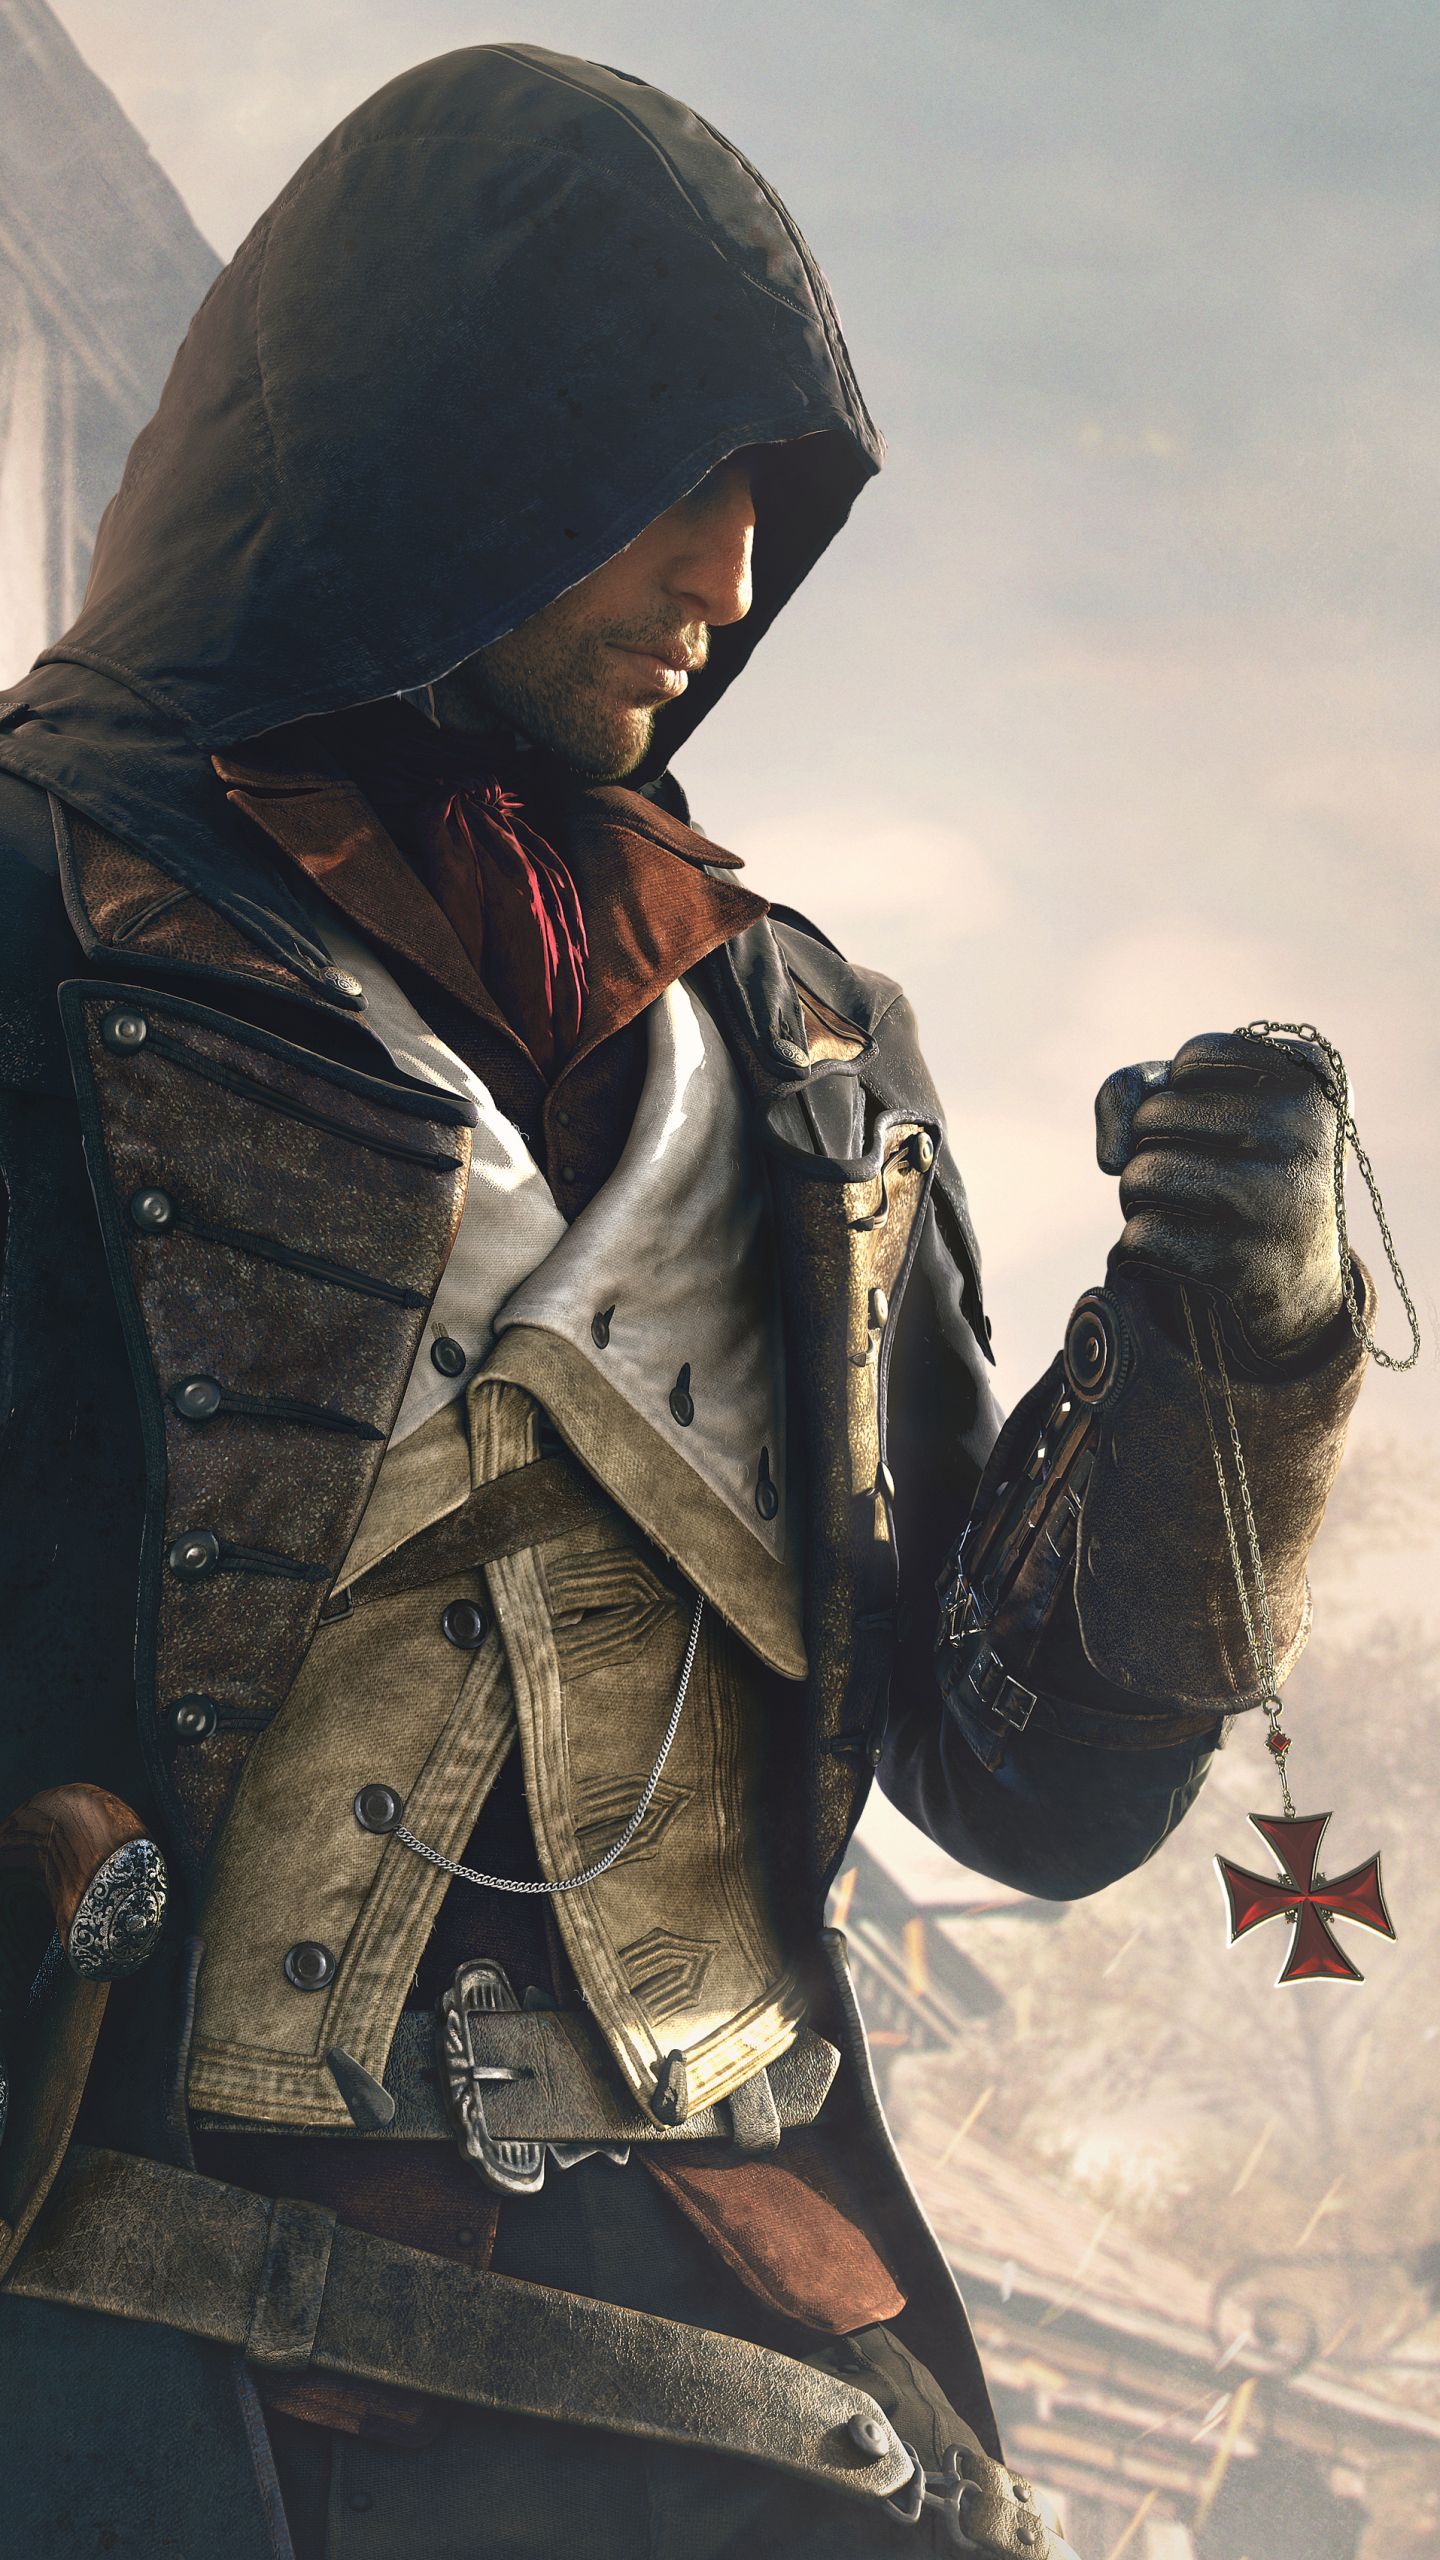 Assassin's Creed: Unity Wallpapers